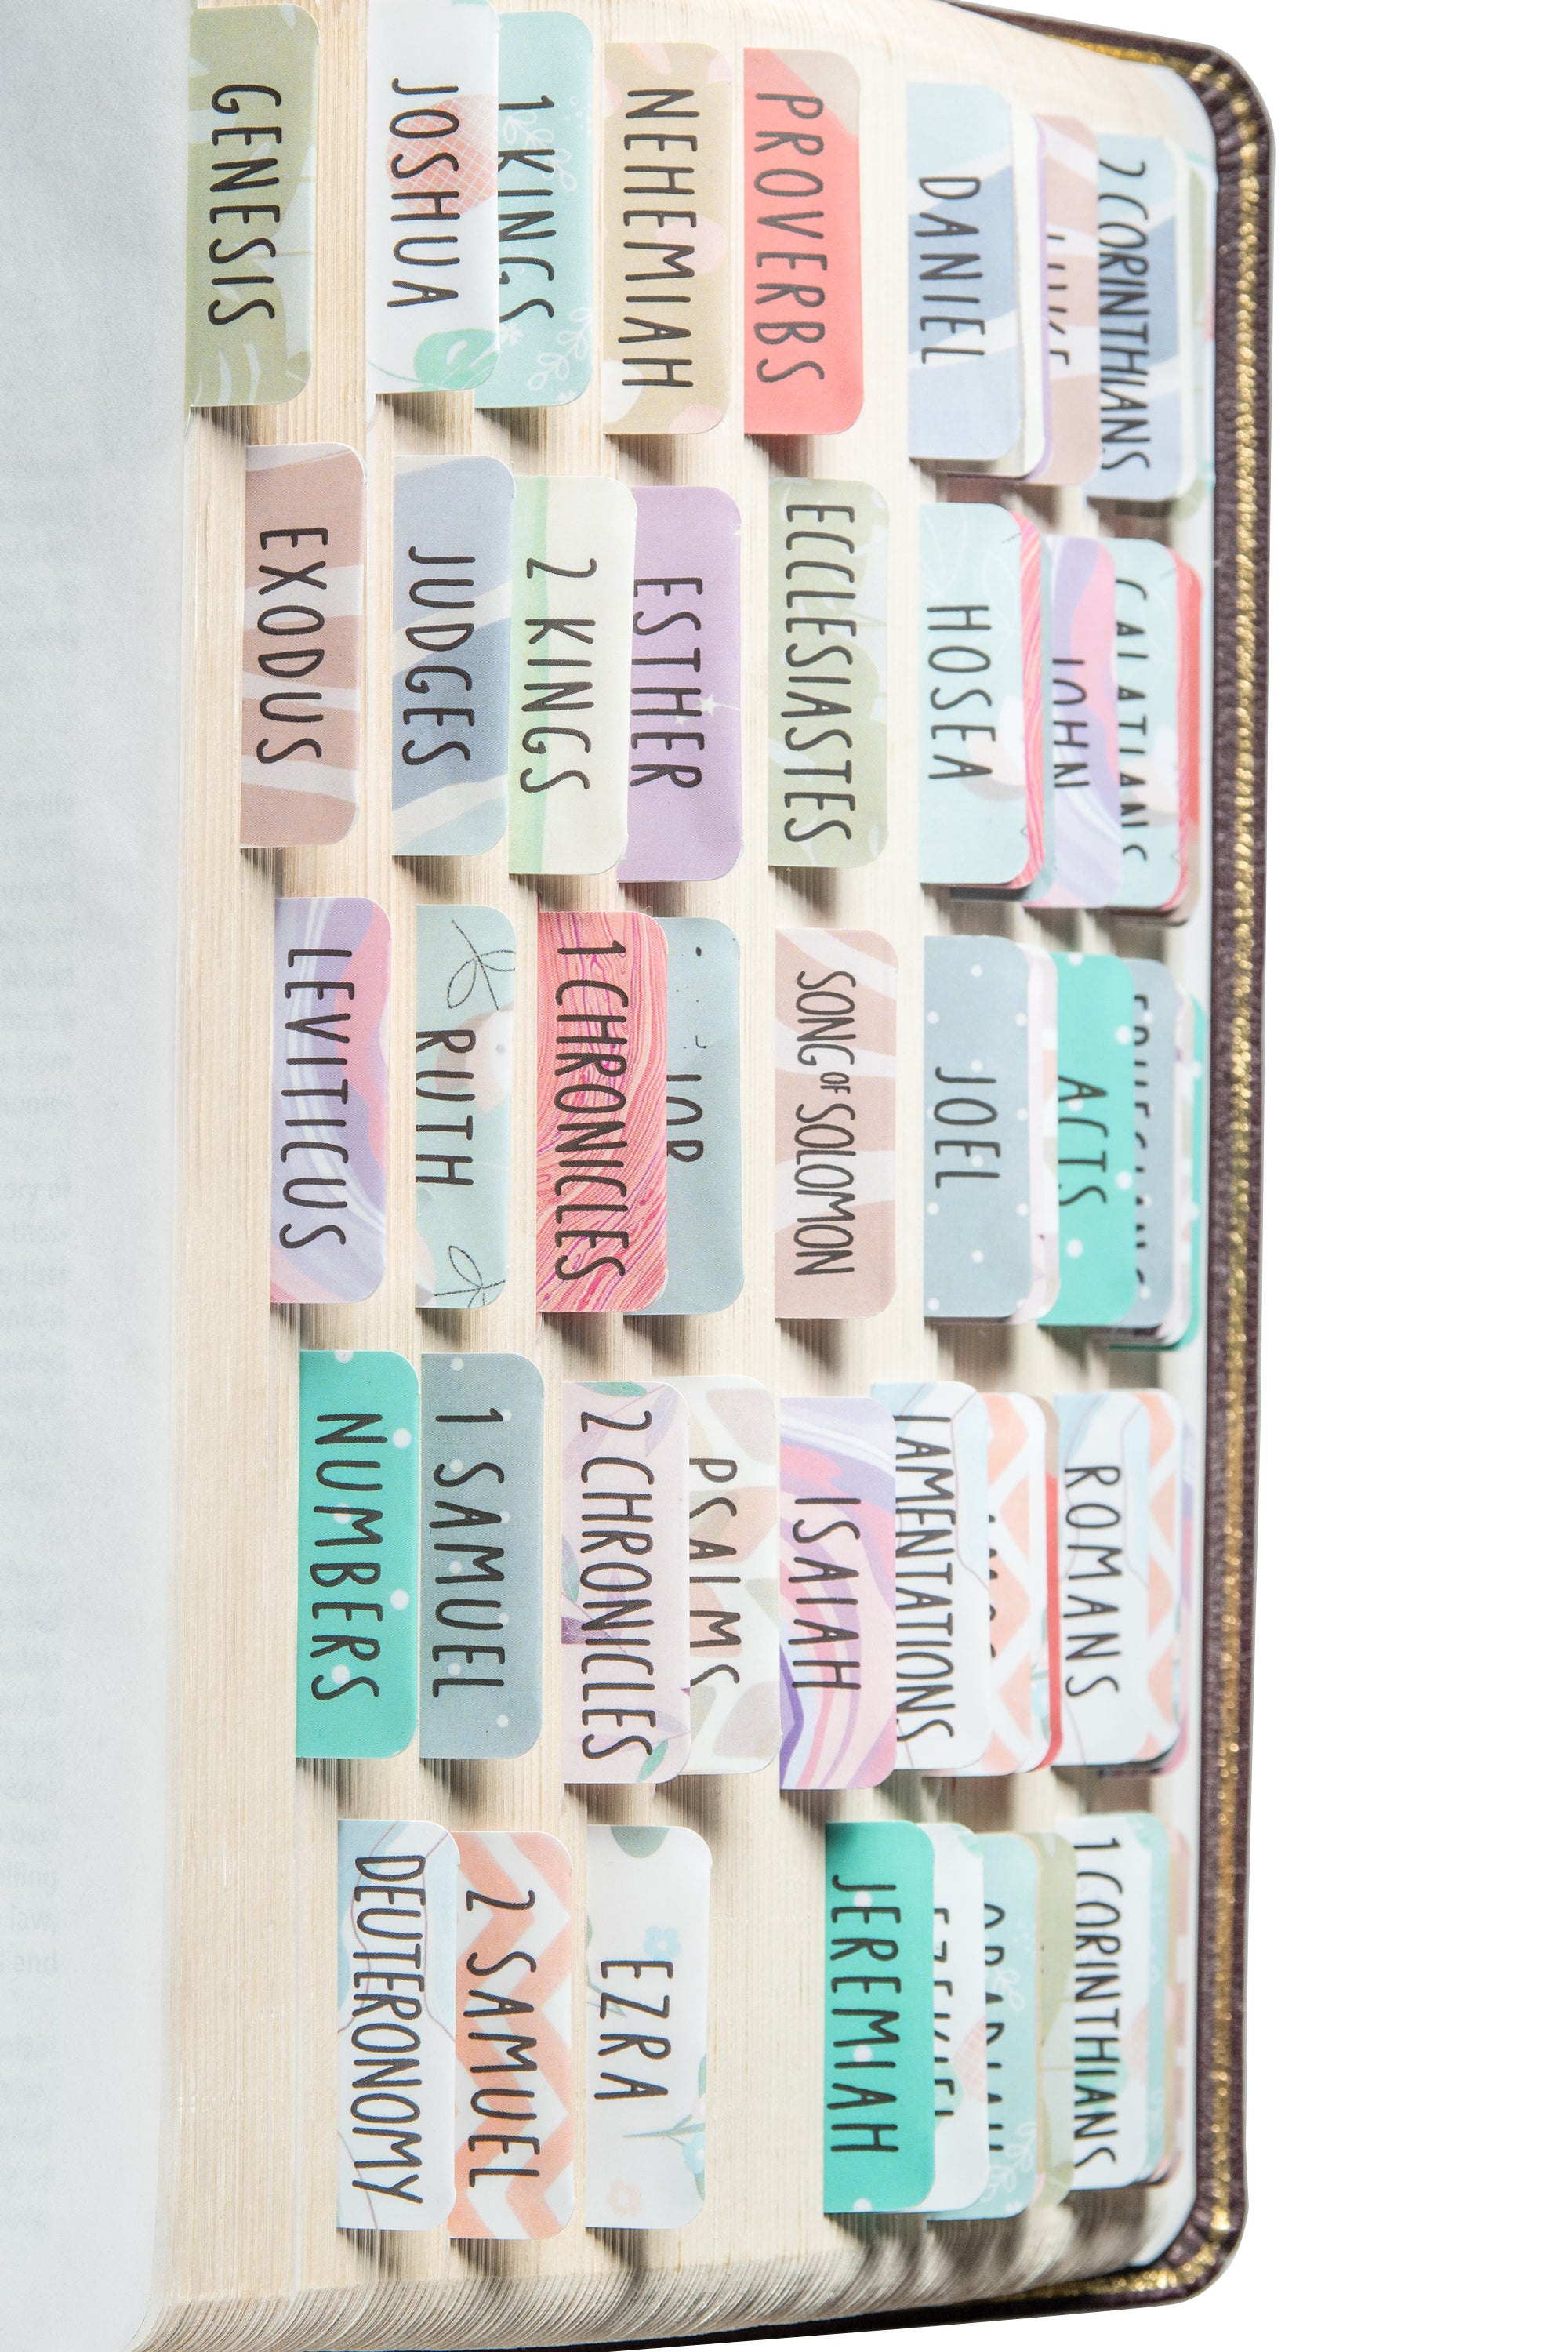 DiverseBee Laminated Bible Tabs (Large Print, Easy to Apply), Bible Study  Journaling Supplies, 84 Bible Index Book Tabs for Men and Women, Bible  Accessories, Includes 18 Blank Tabs - Noble Theme - DCBG